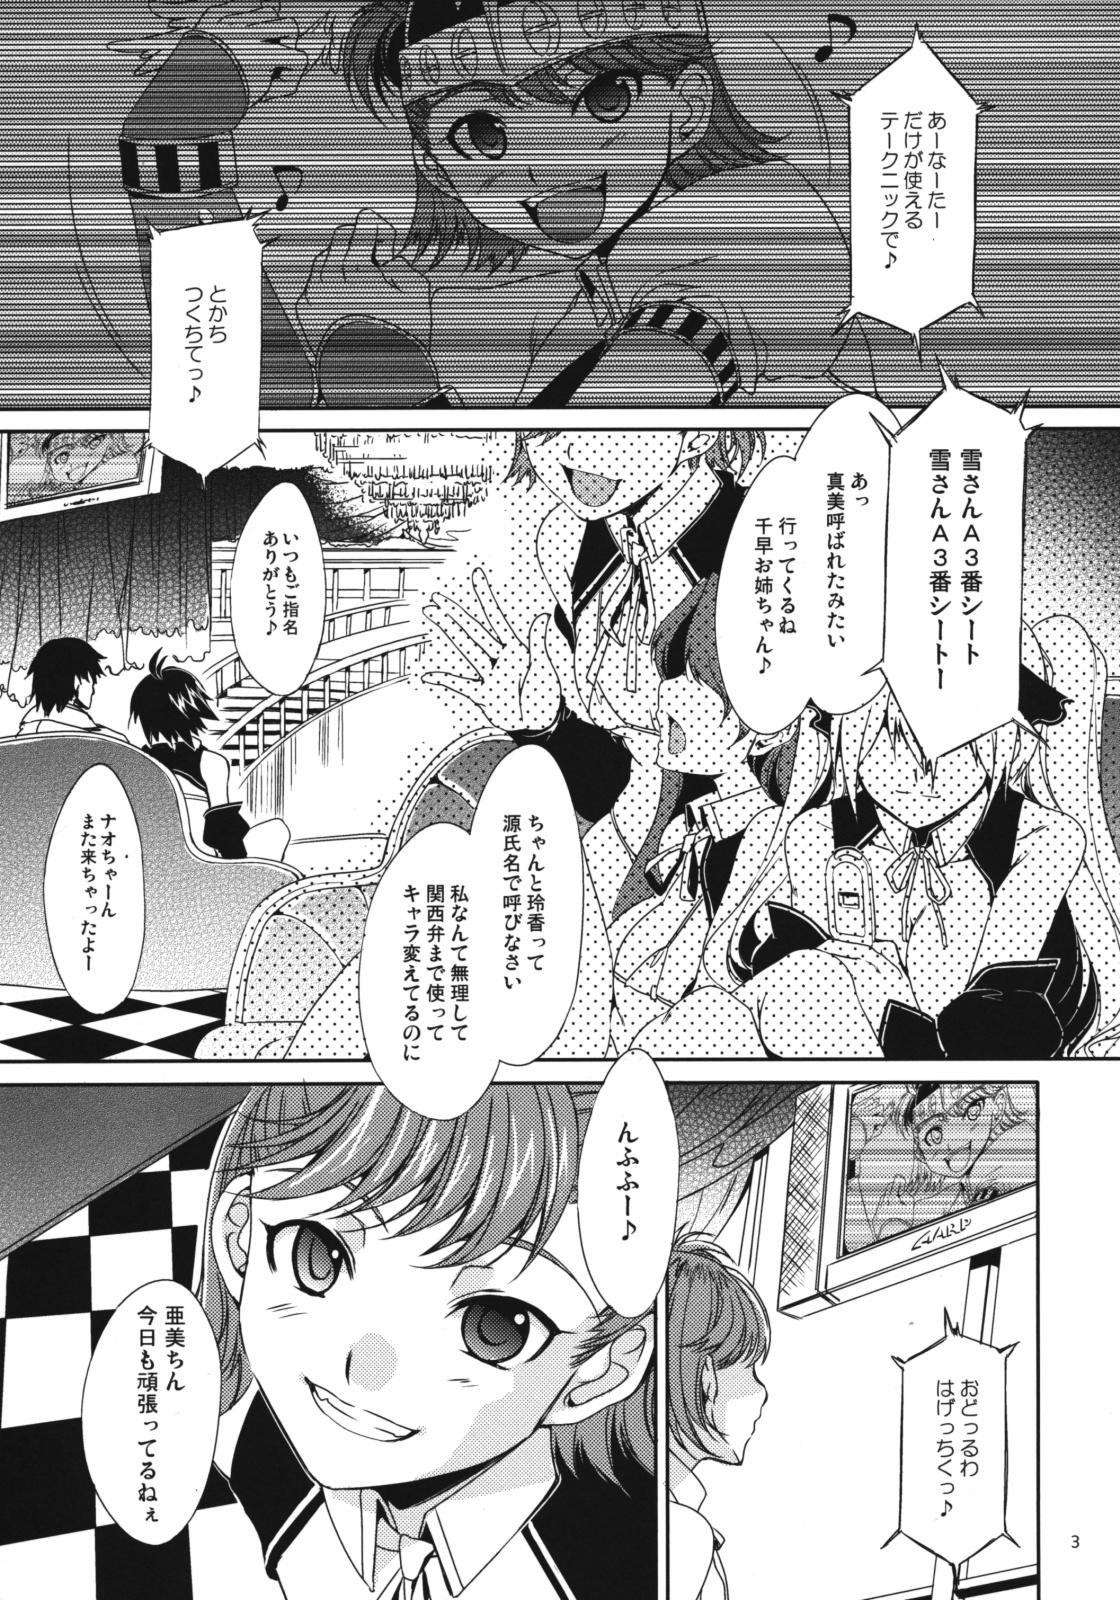 Sloppy The AnimalM@ster Vol.4 - The idolmaster Ride - Page 4